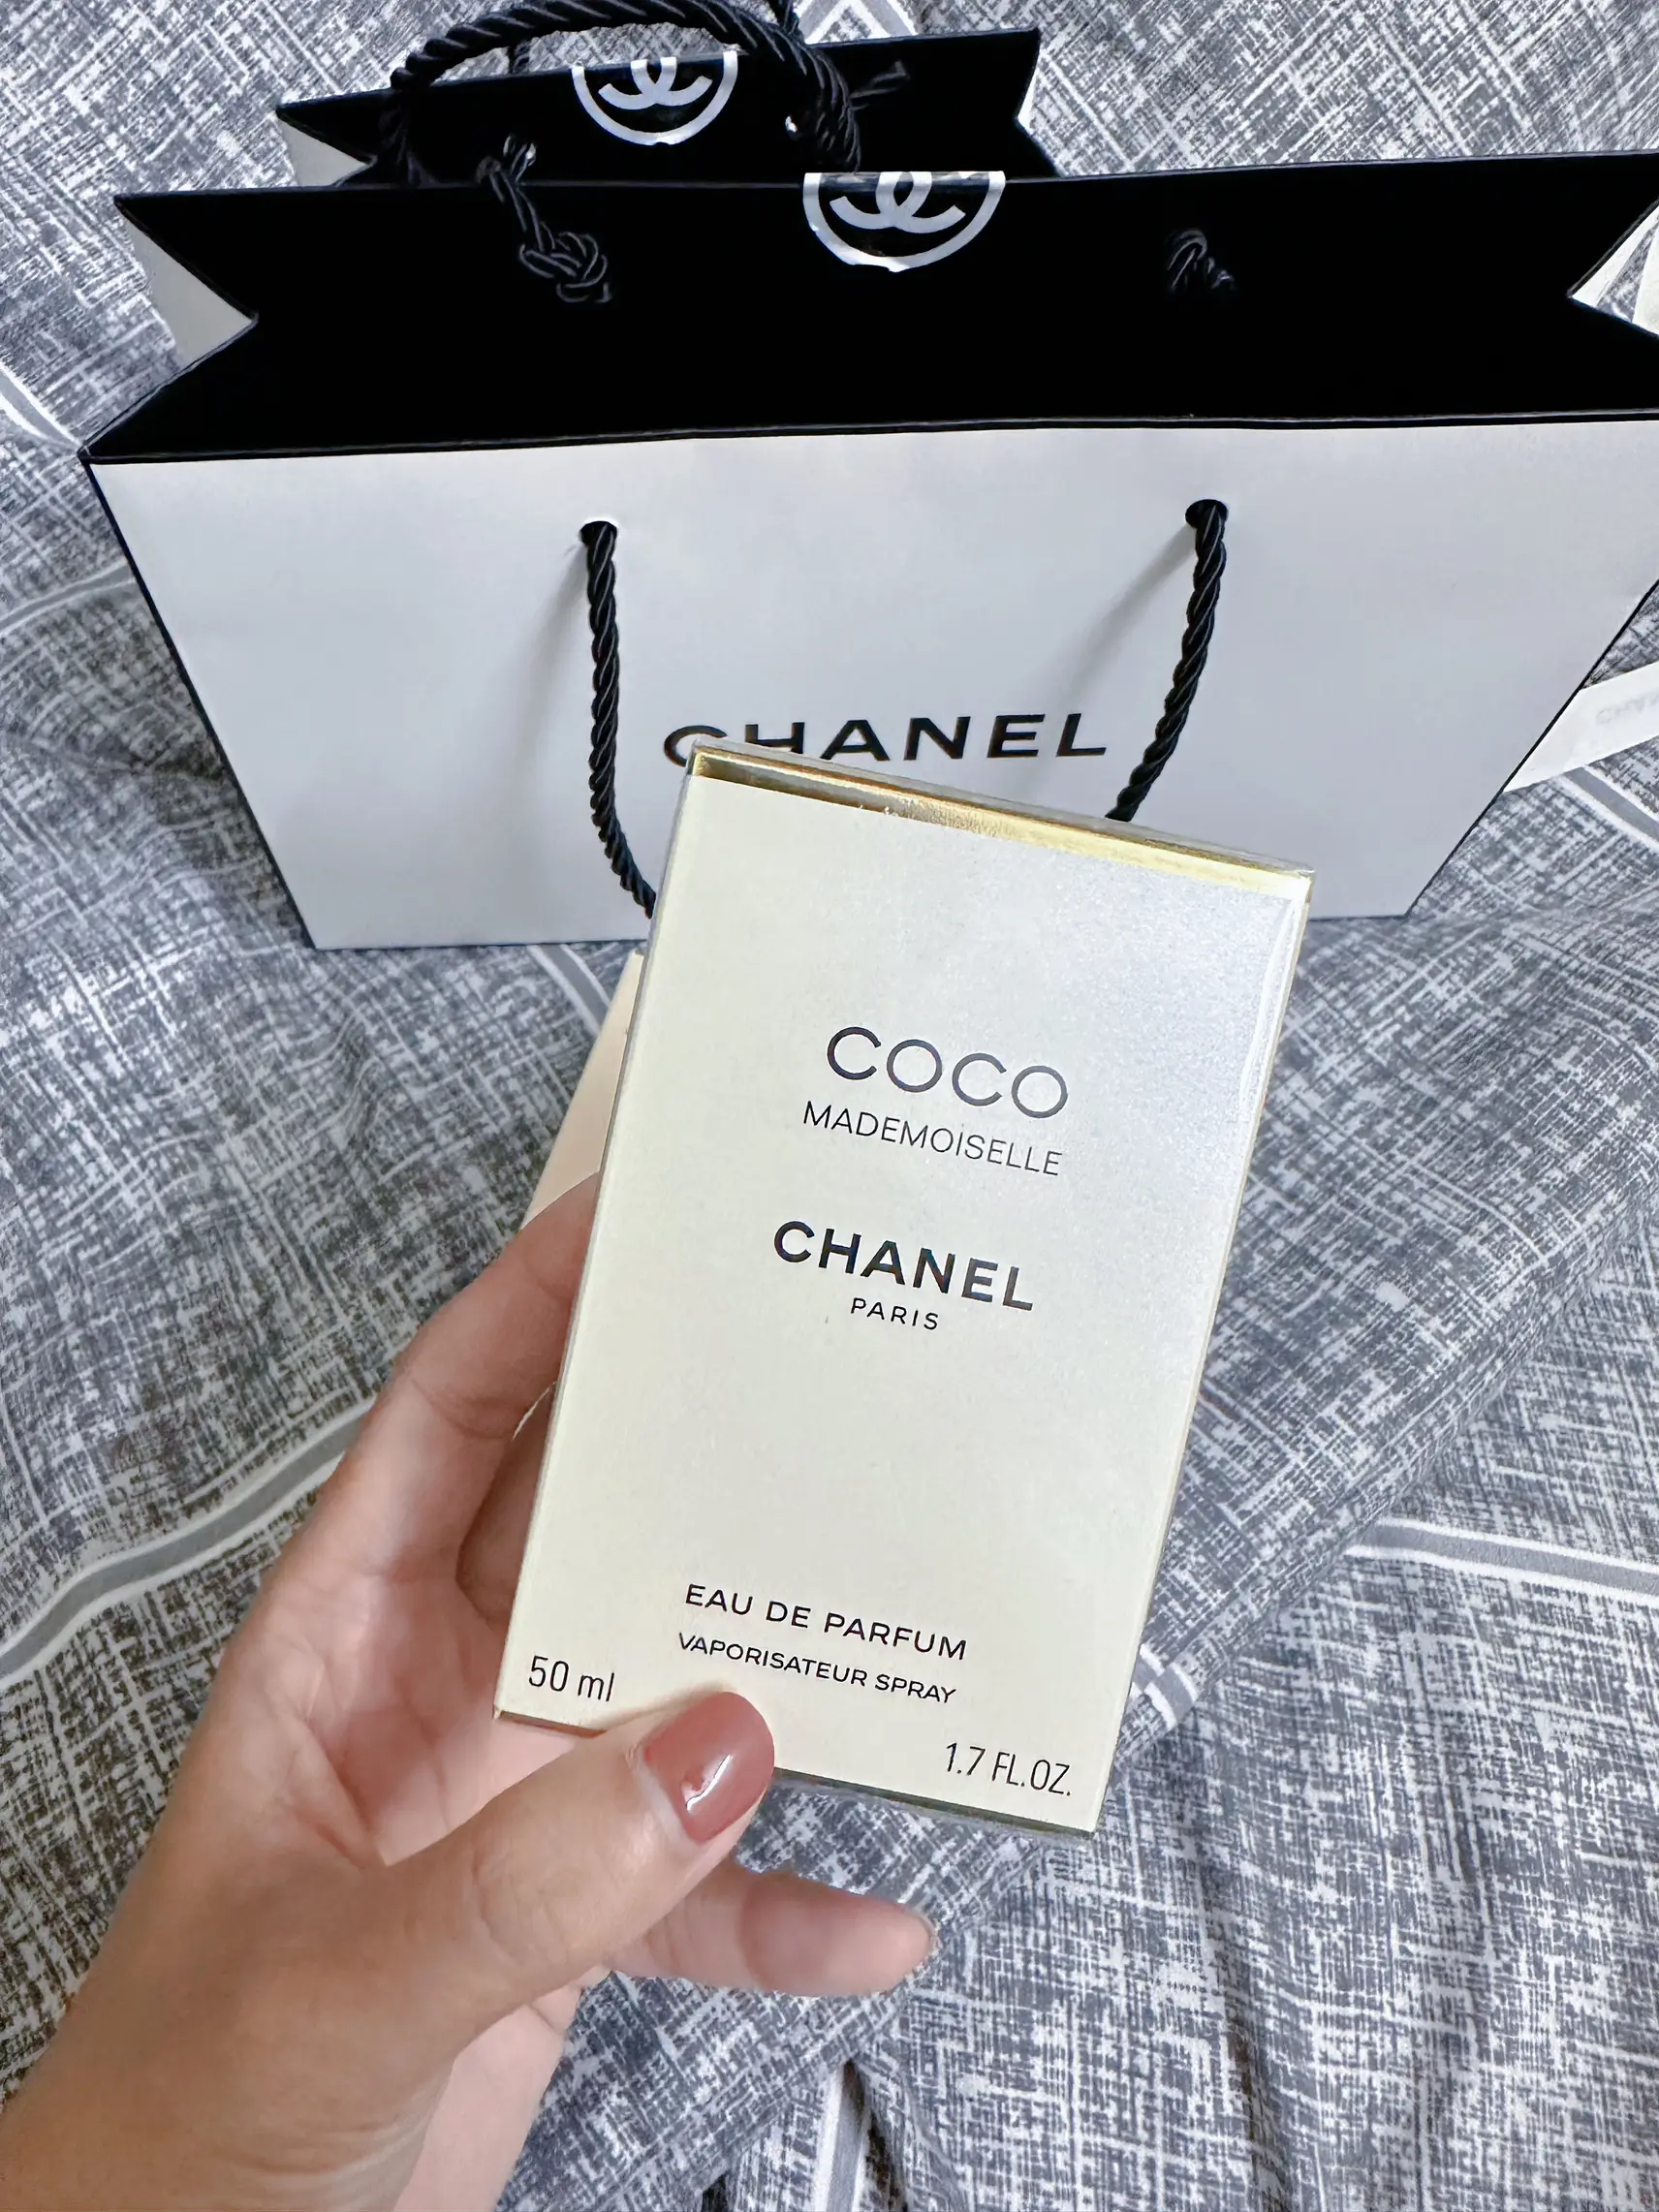 Chanel items that girls must have 😍😍, Gallery posted by Ladyfirst 🤍